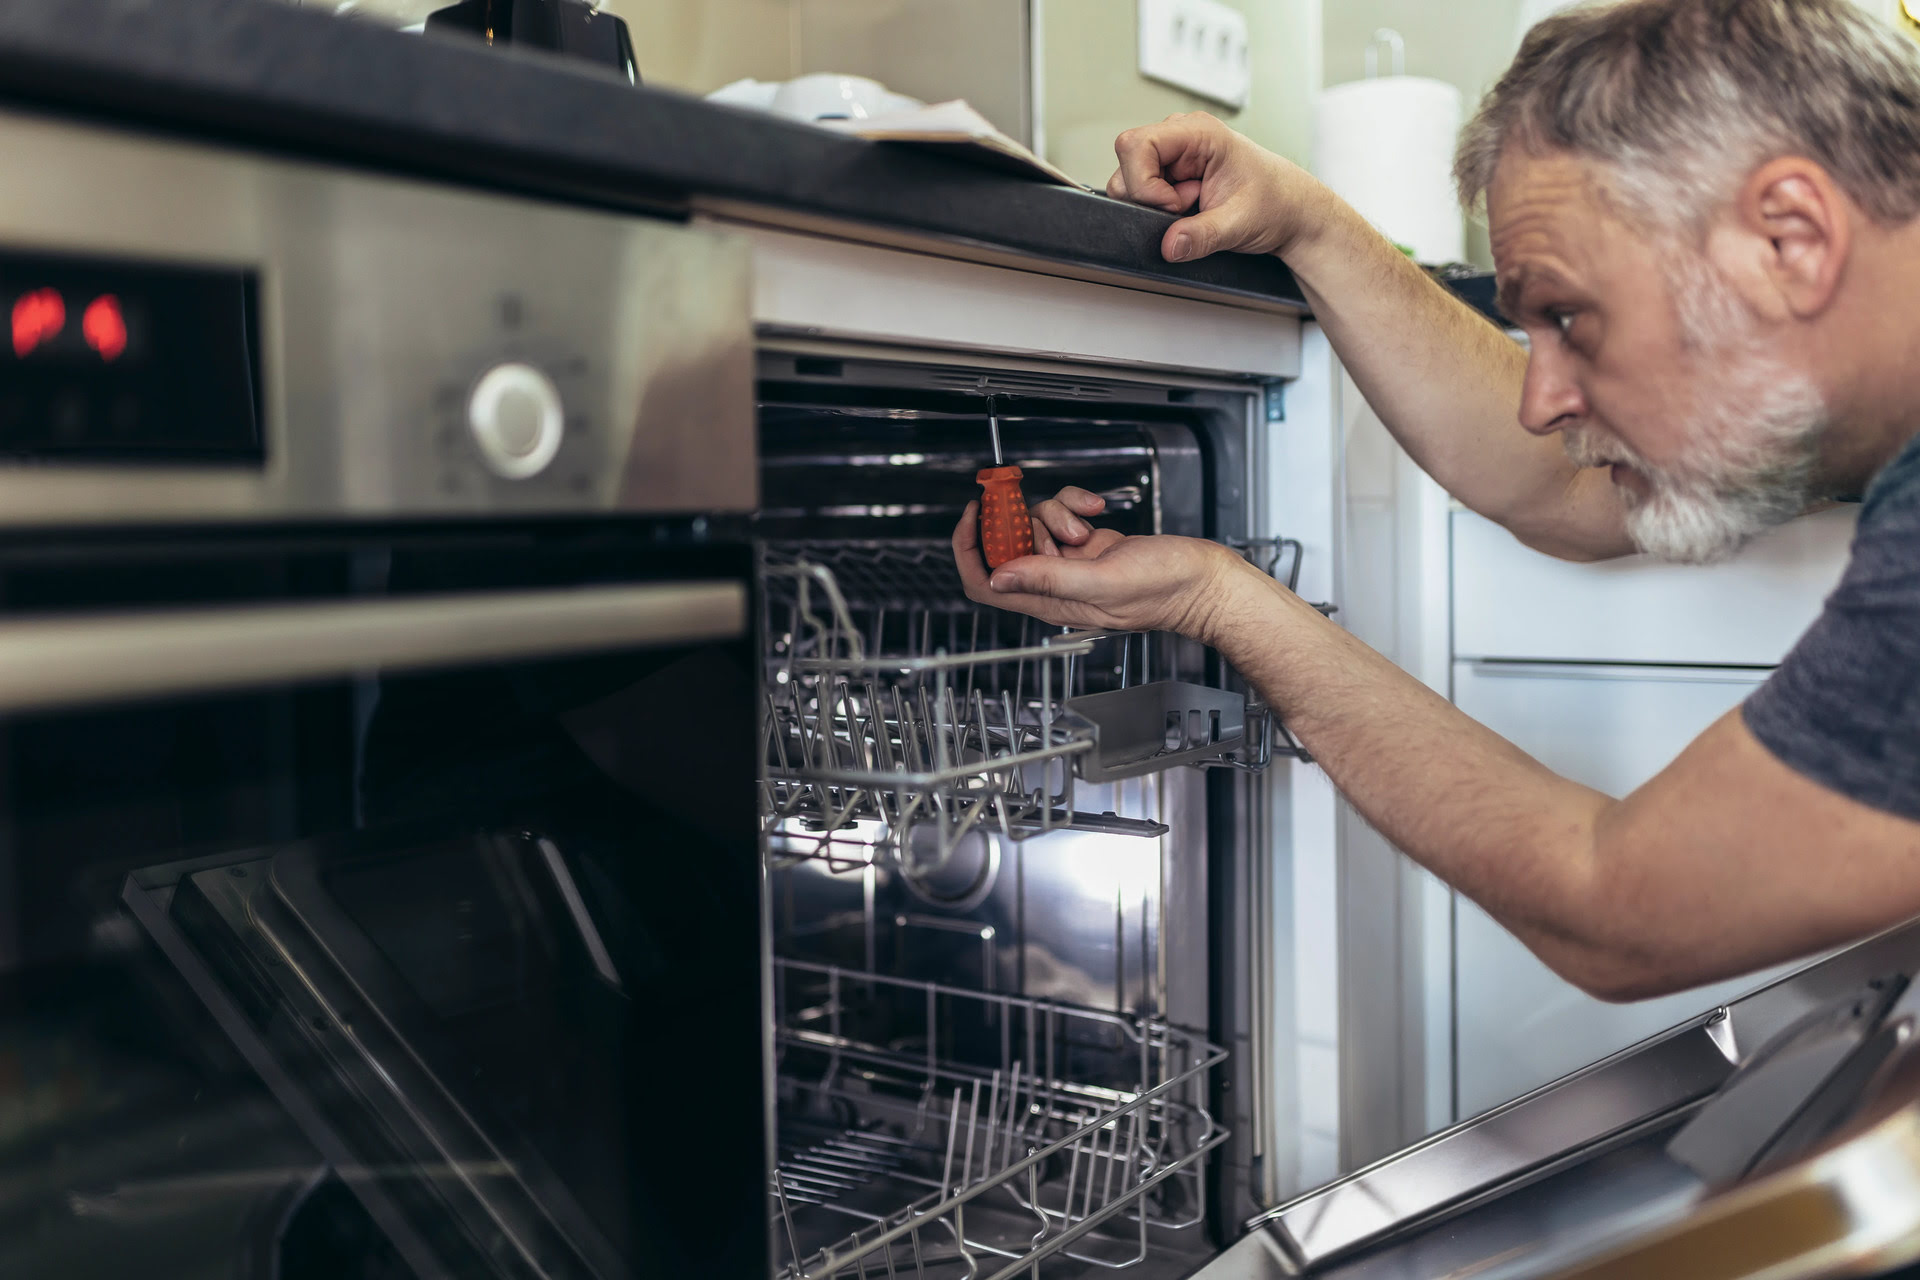 How To Install Frigidaire Dishwasher